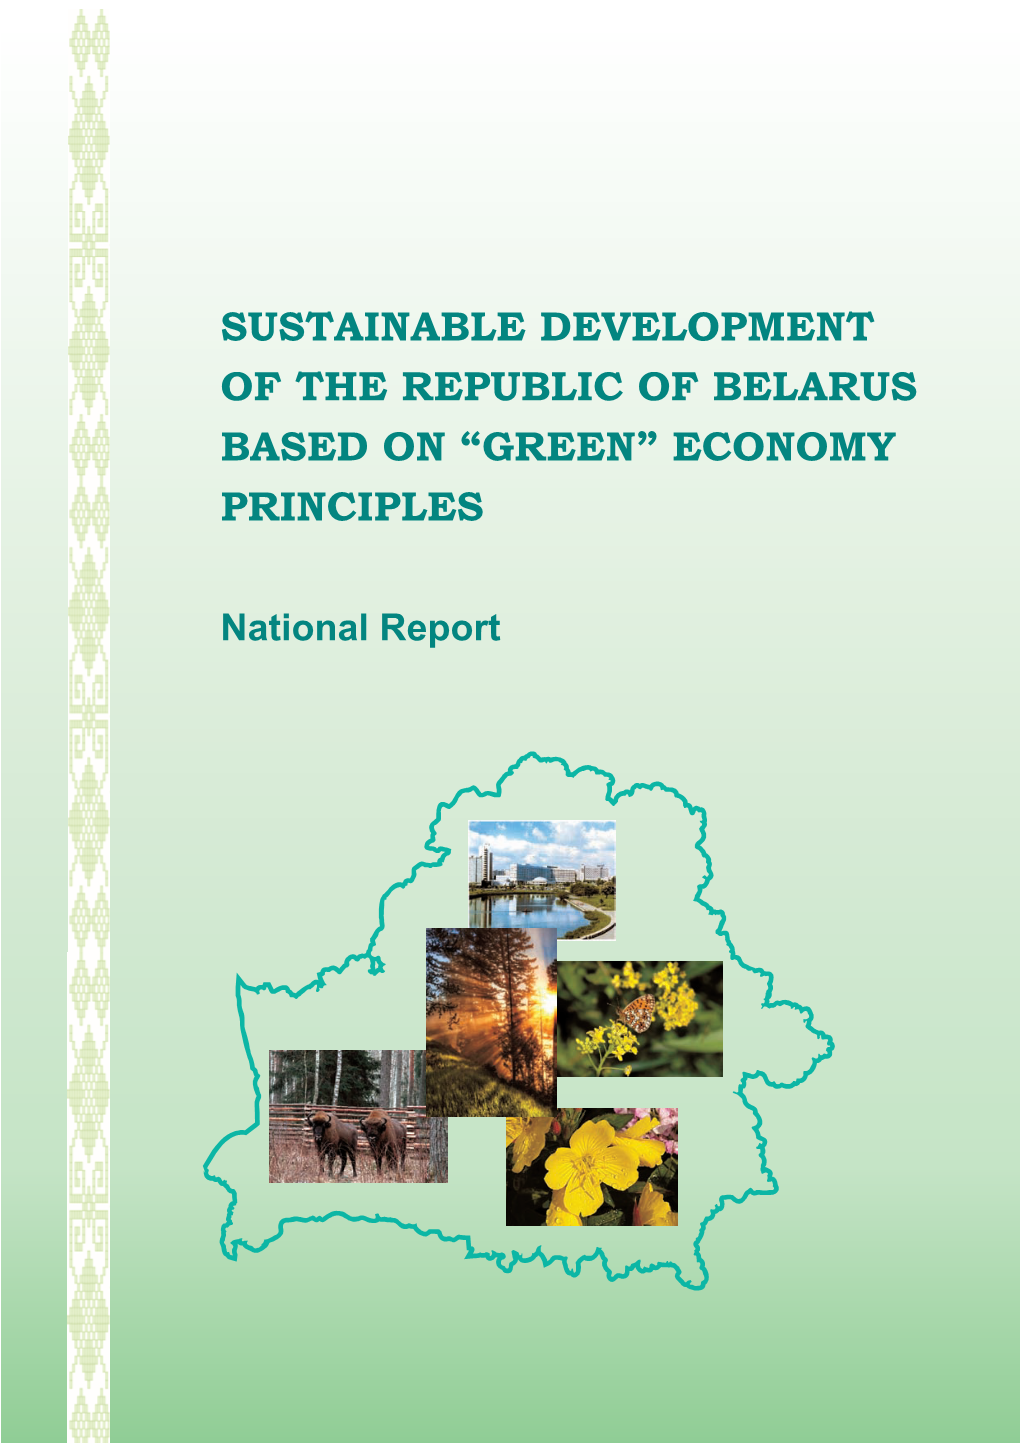 Sustainable Development of the Republic of Belarus Based on “Green” Economy Principles